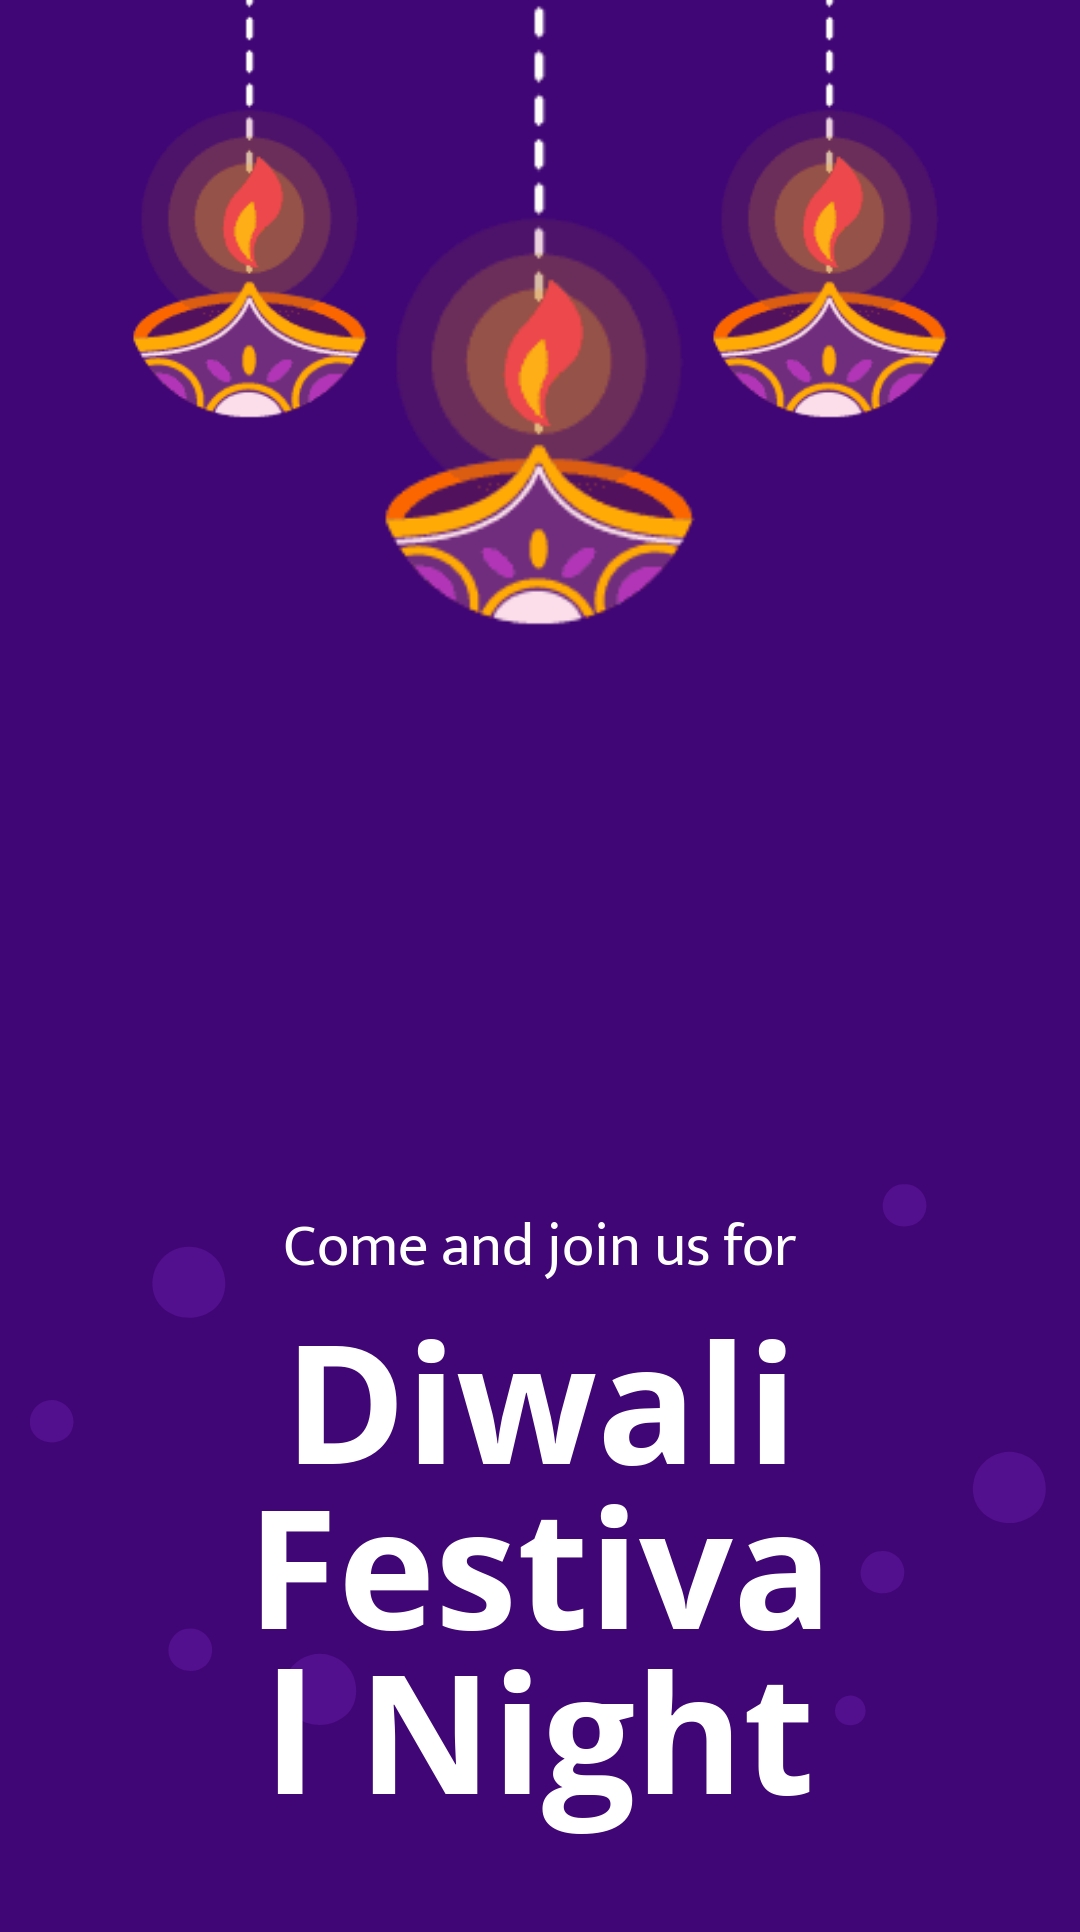 Free Diwali Festival Event Snapchat Geofilter Template